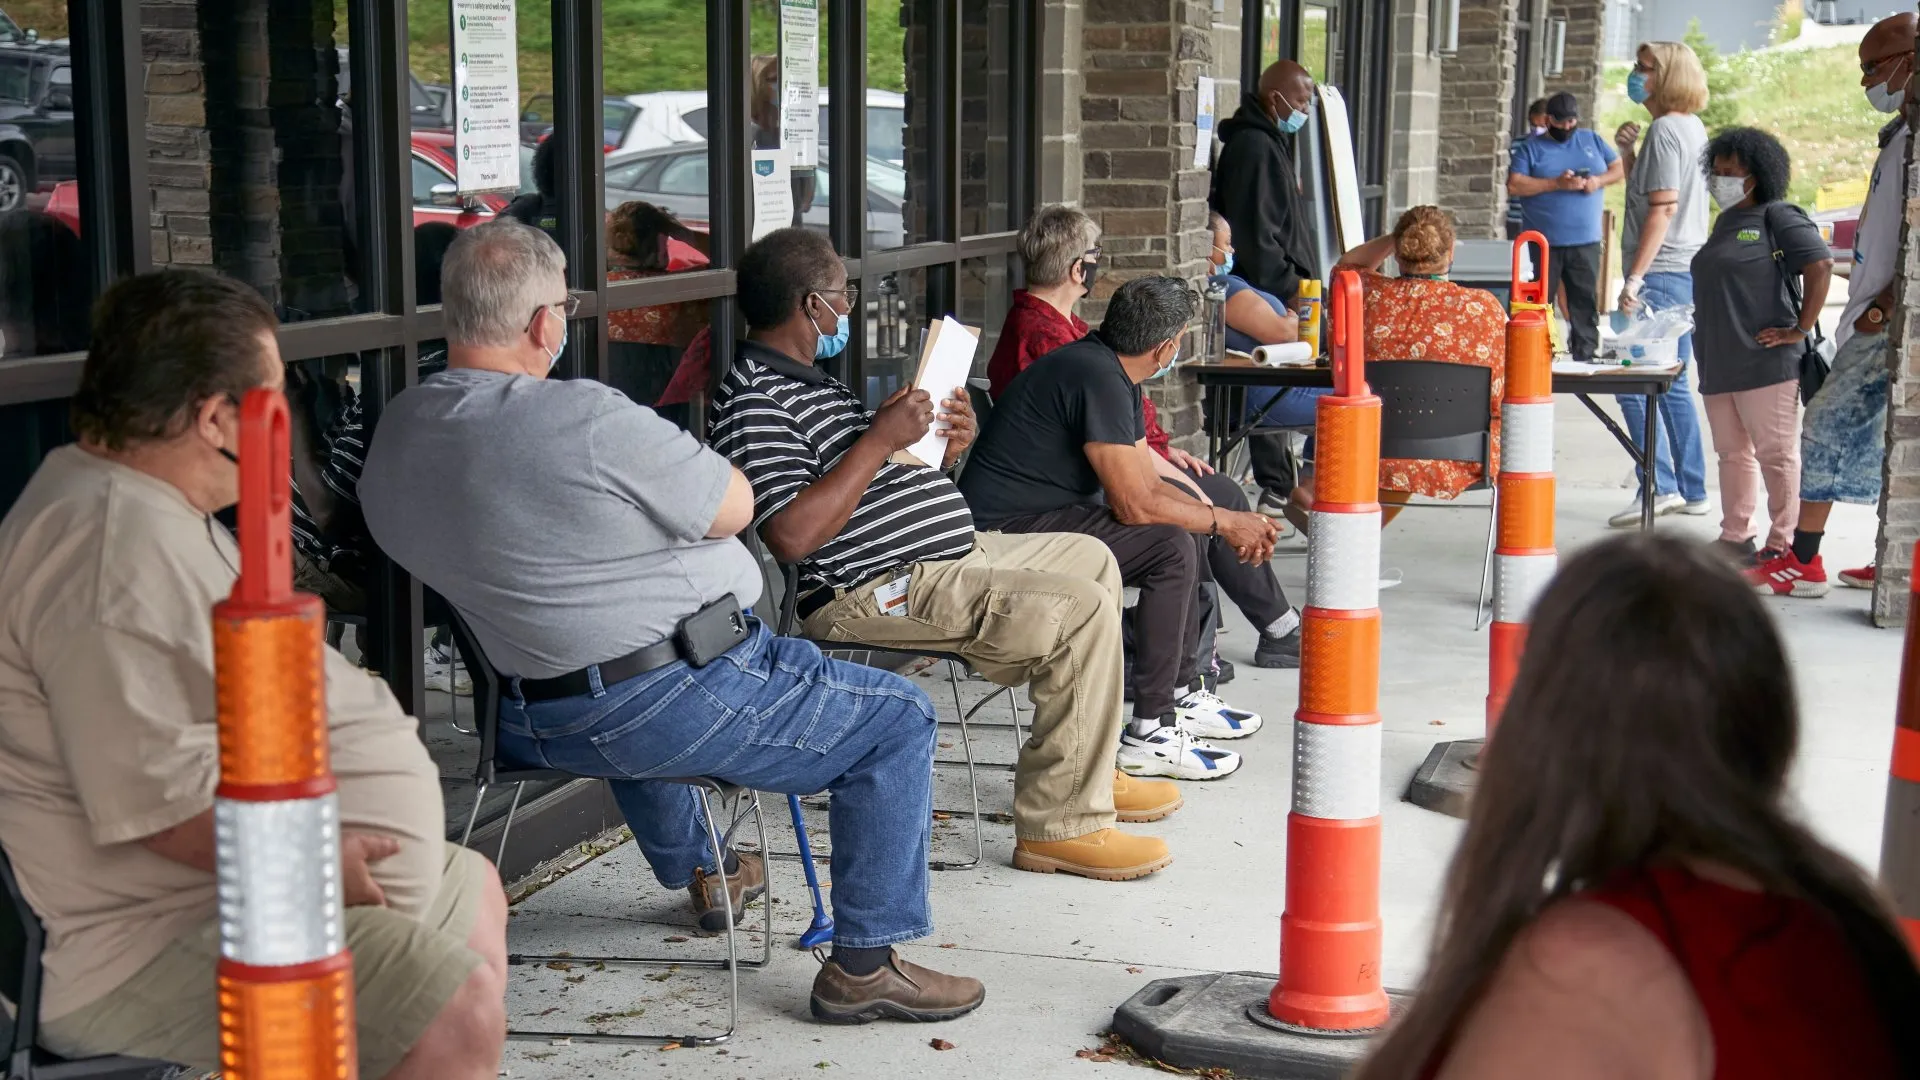 Mandatory Credit: Photo by Nati Harnik/AP/Shutterstock (10712813a)Job seekers exercise social distancing as they wait to be called into the Heartland Workforce Solutions office in Omaha, Neb.